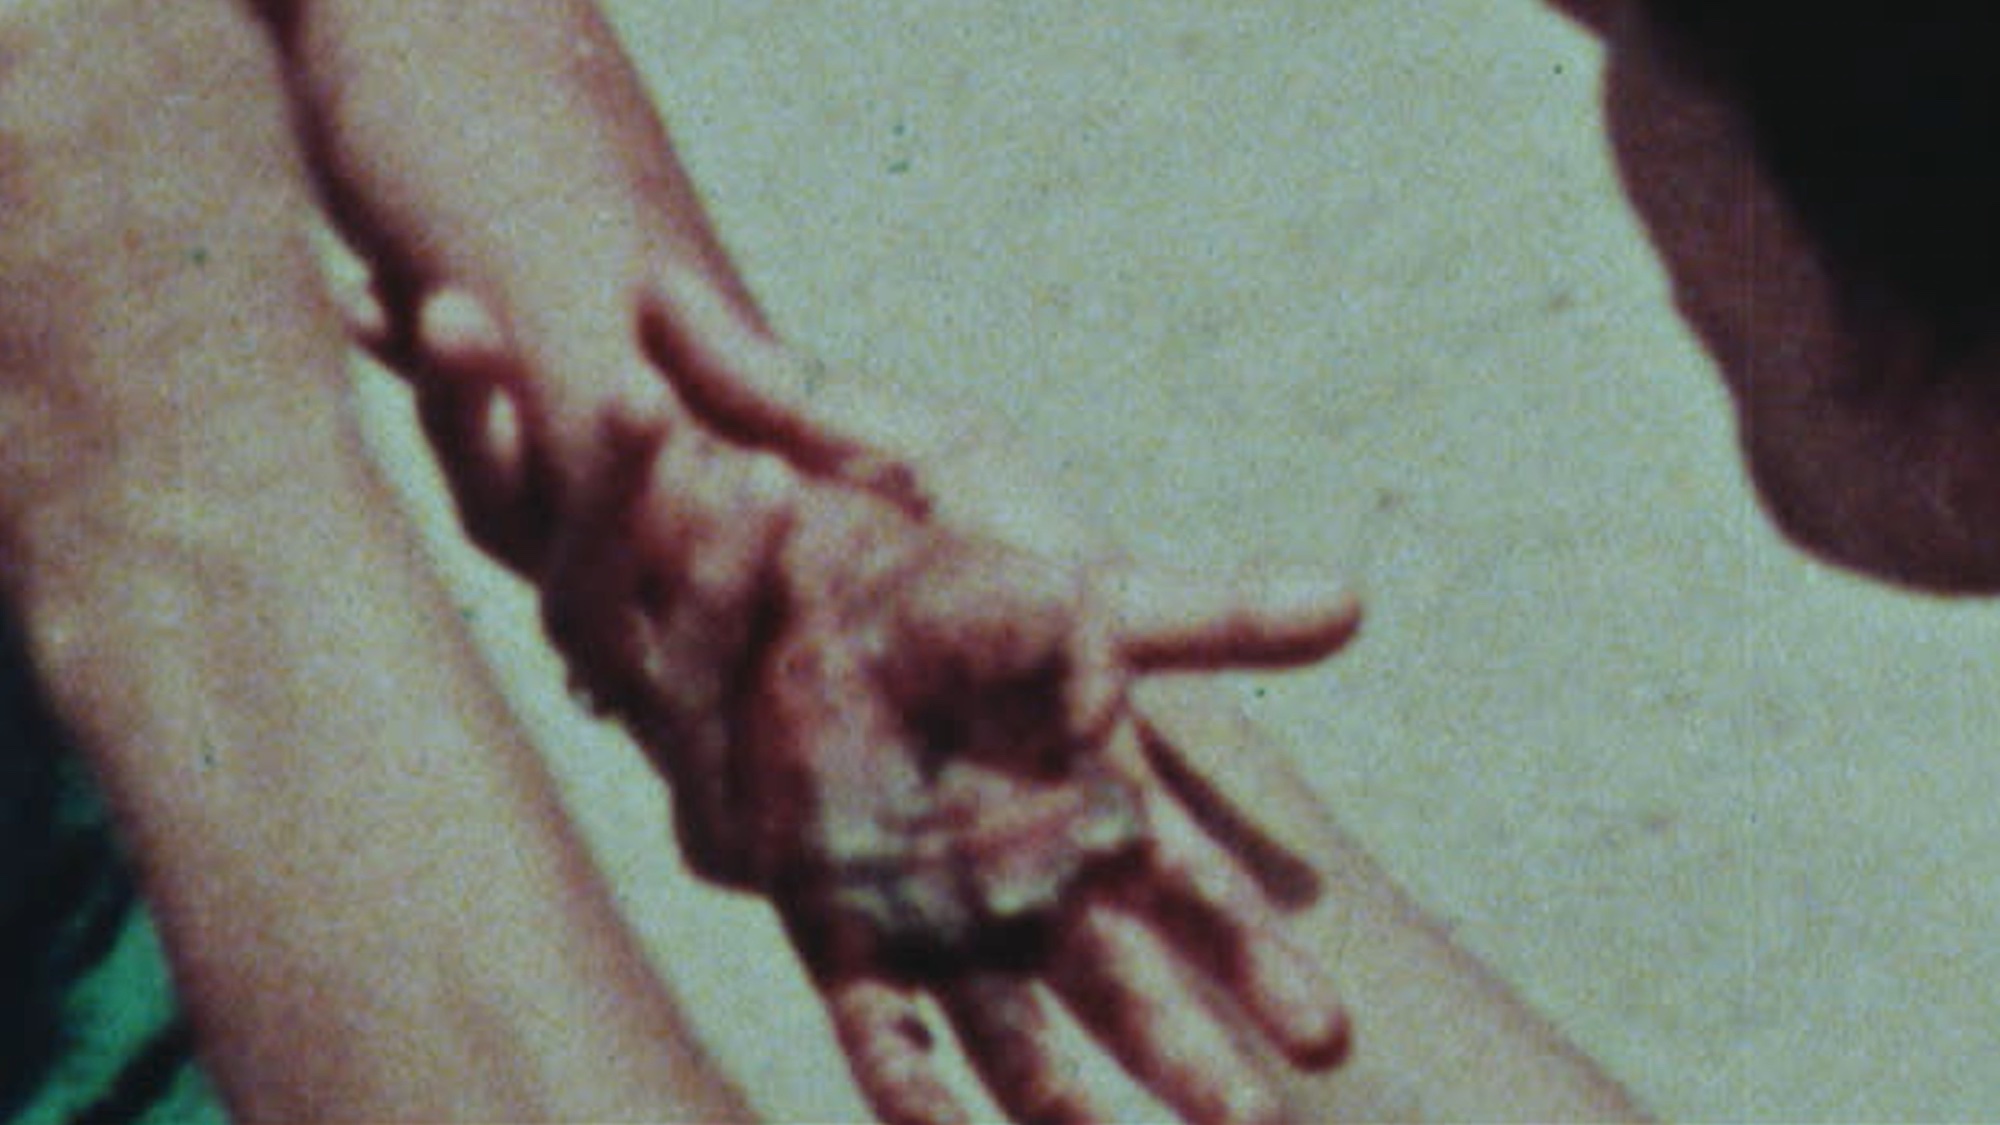 A grainy image of someone holding another person's wrist, their hands stained with a dark liquid